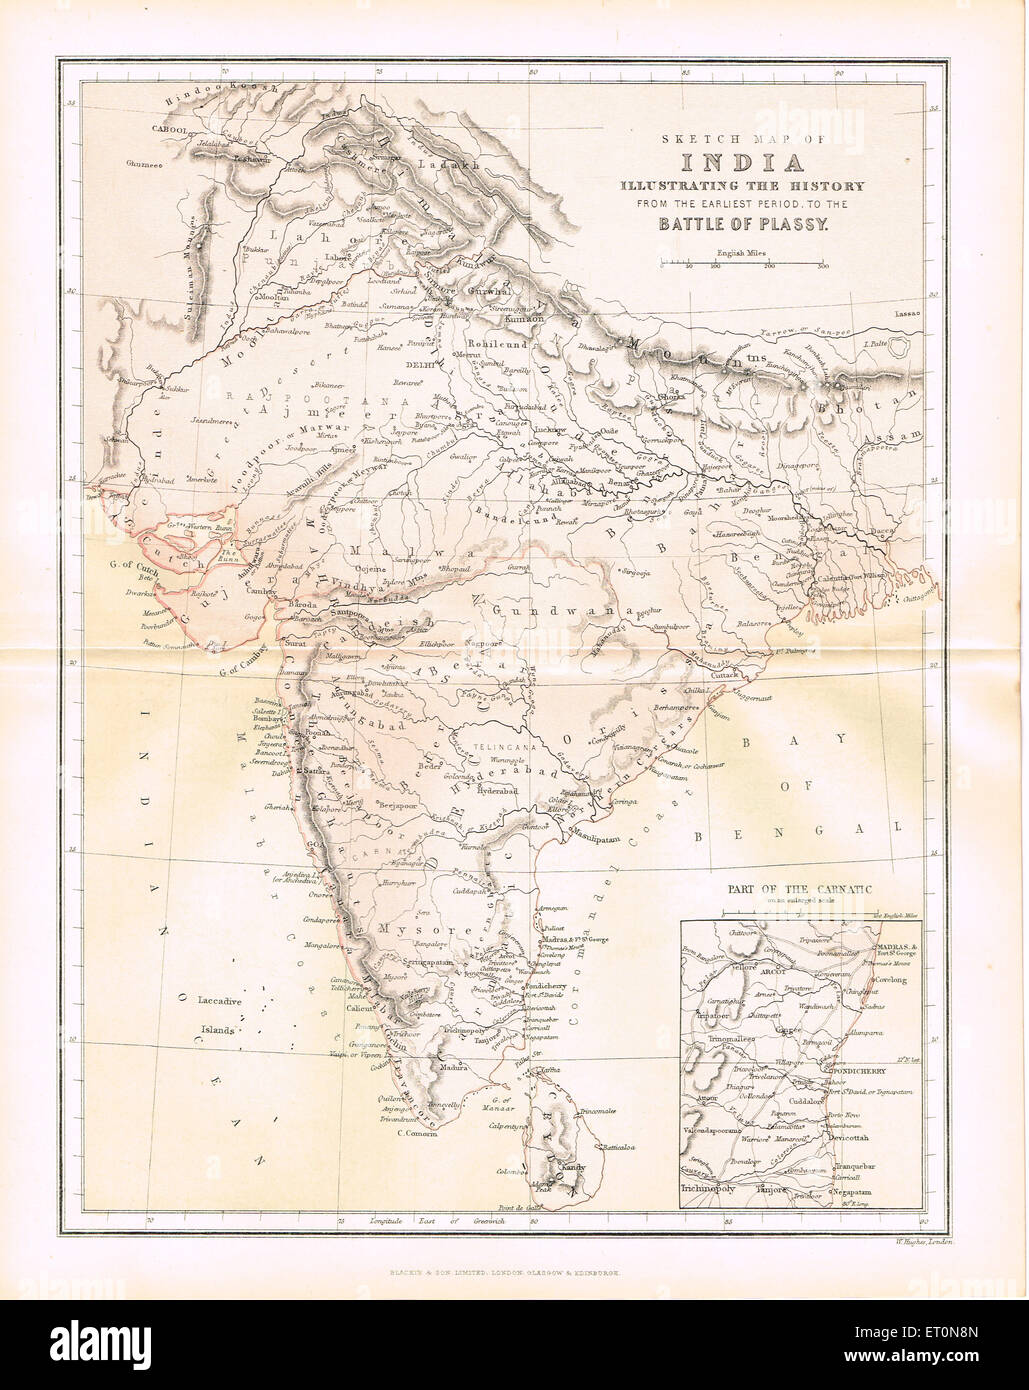 Sketch Map Of India To Battle Of Plassey Stock Photo Alamy